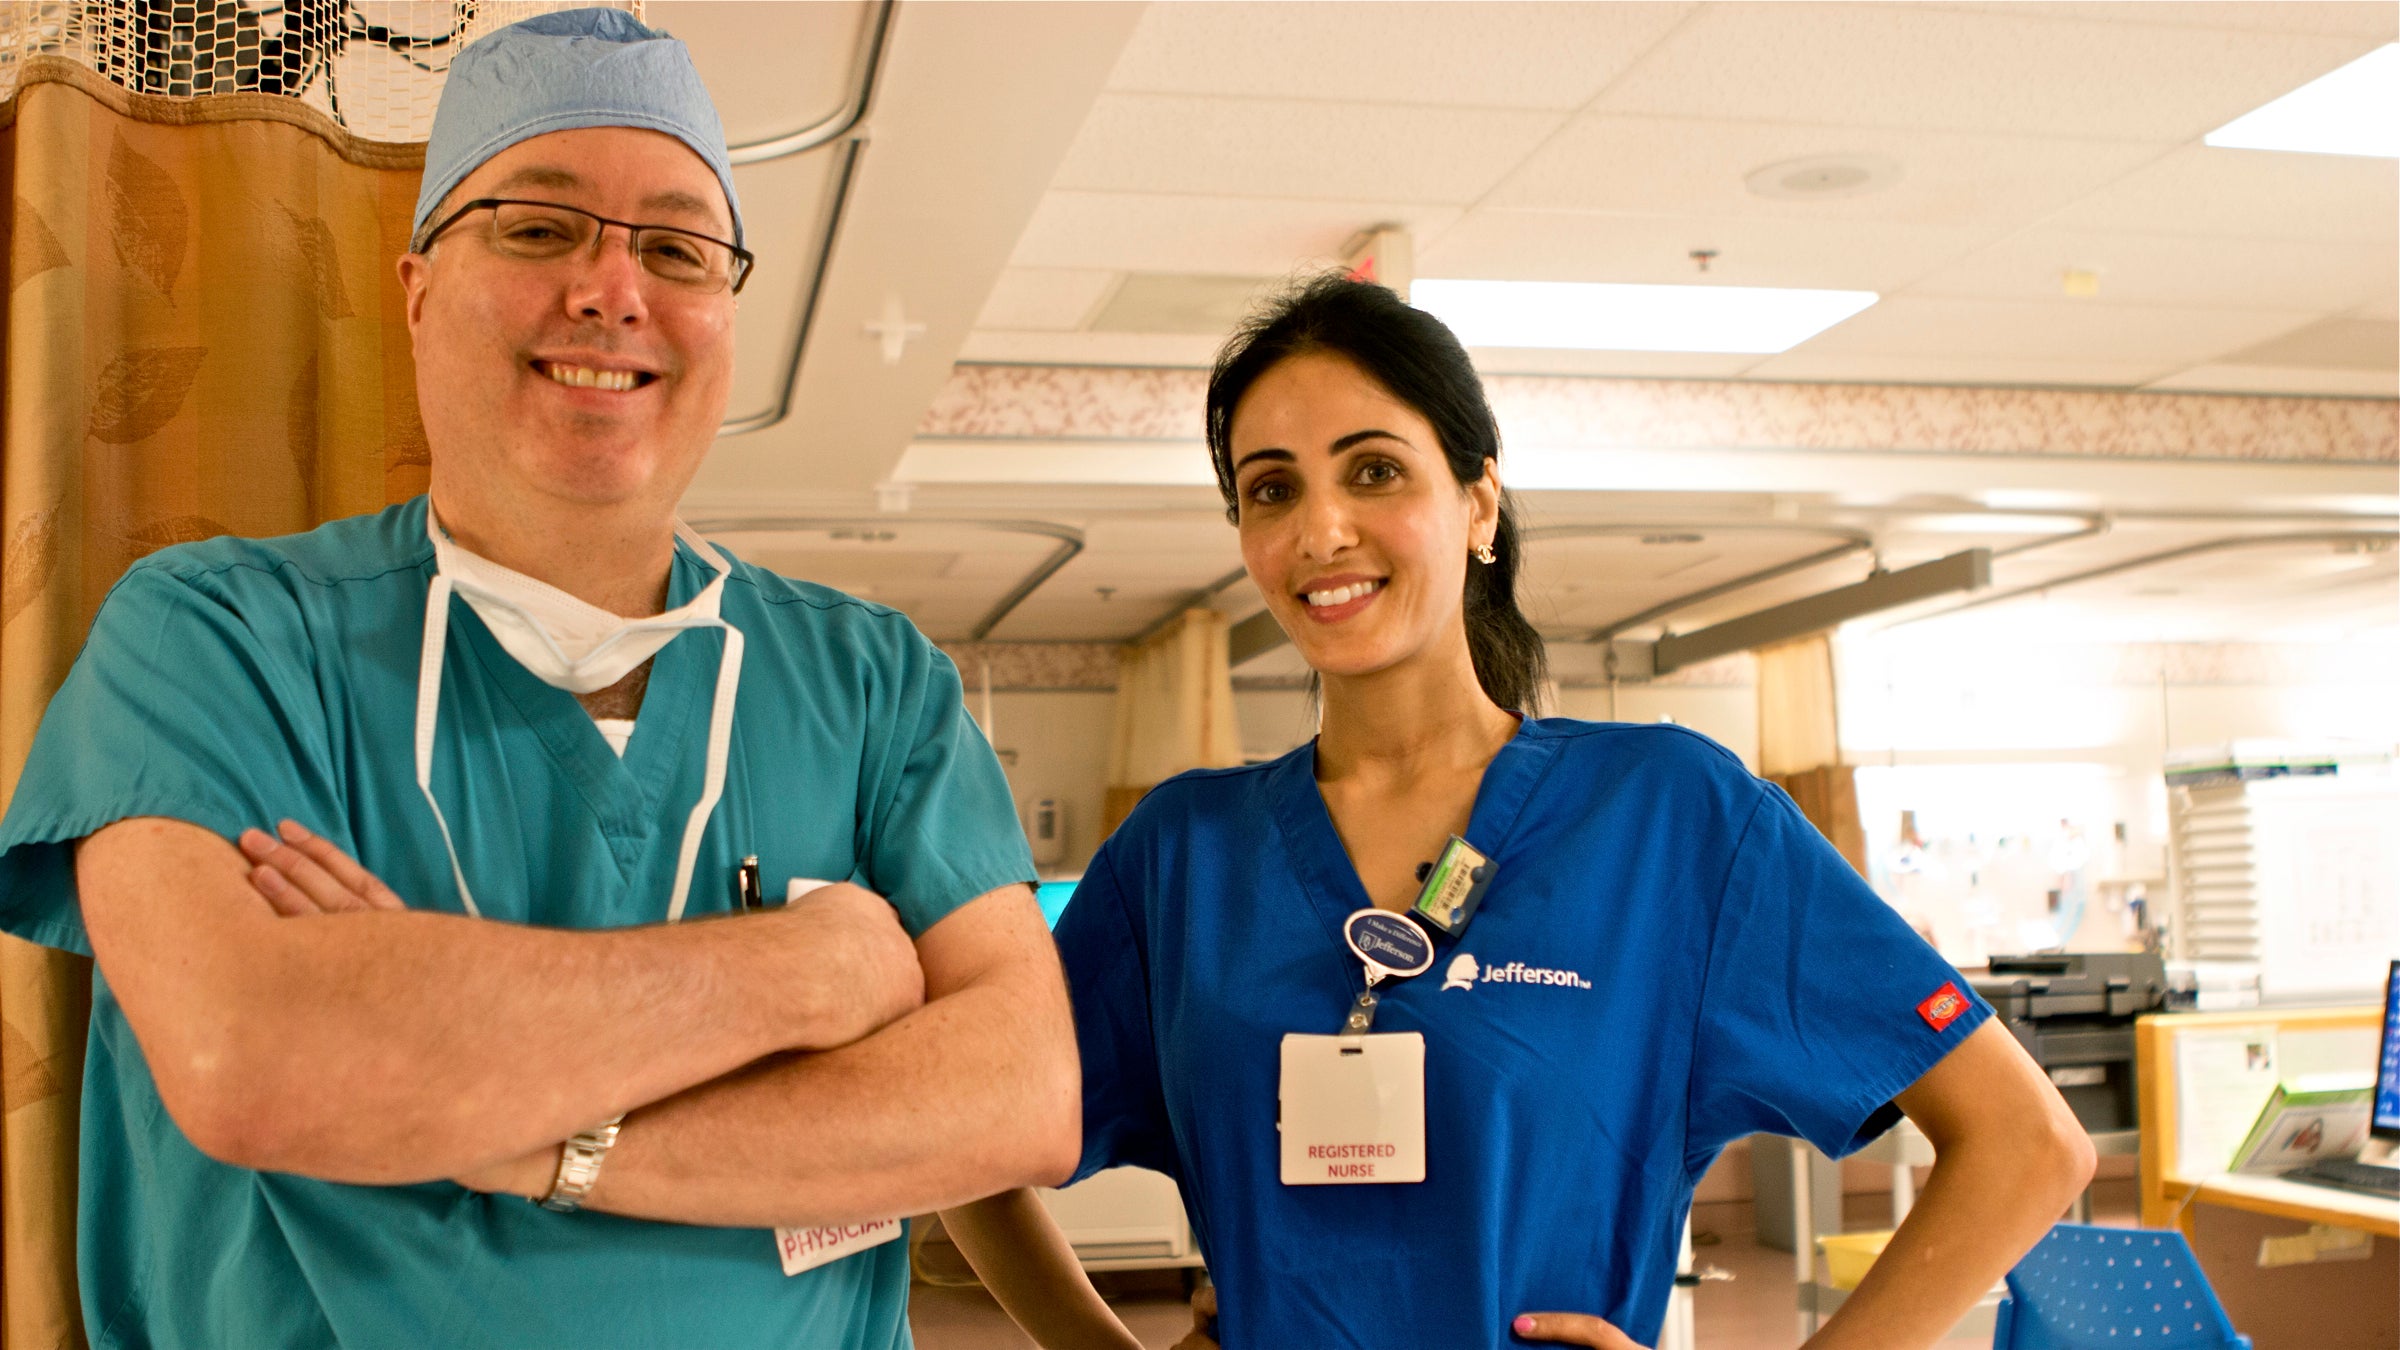 Dr. James Heitz, seen here with nurse Esmihan Almontaser, says crying after anesthesia occurs frequently enough that 'we should be aware of it as providers' even though it's not frequently documented in major anesthesiology textbooks (Karen Shakerdge/for WHYY)